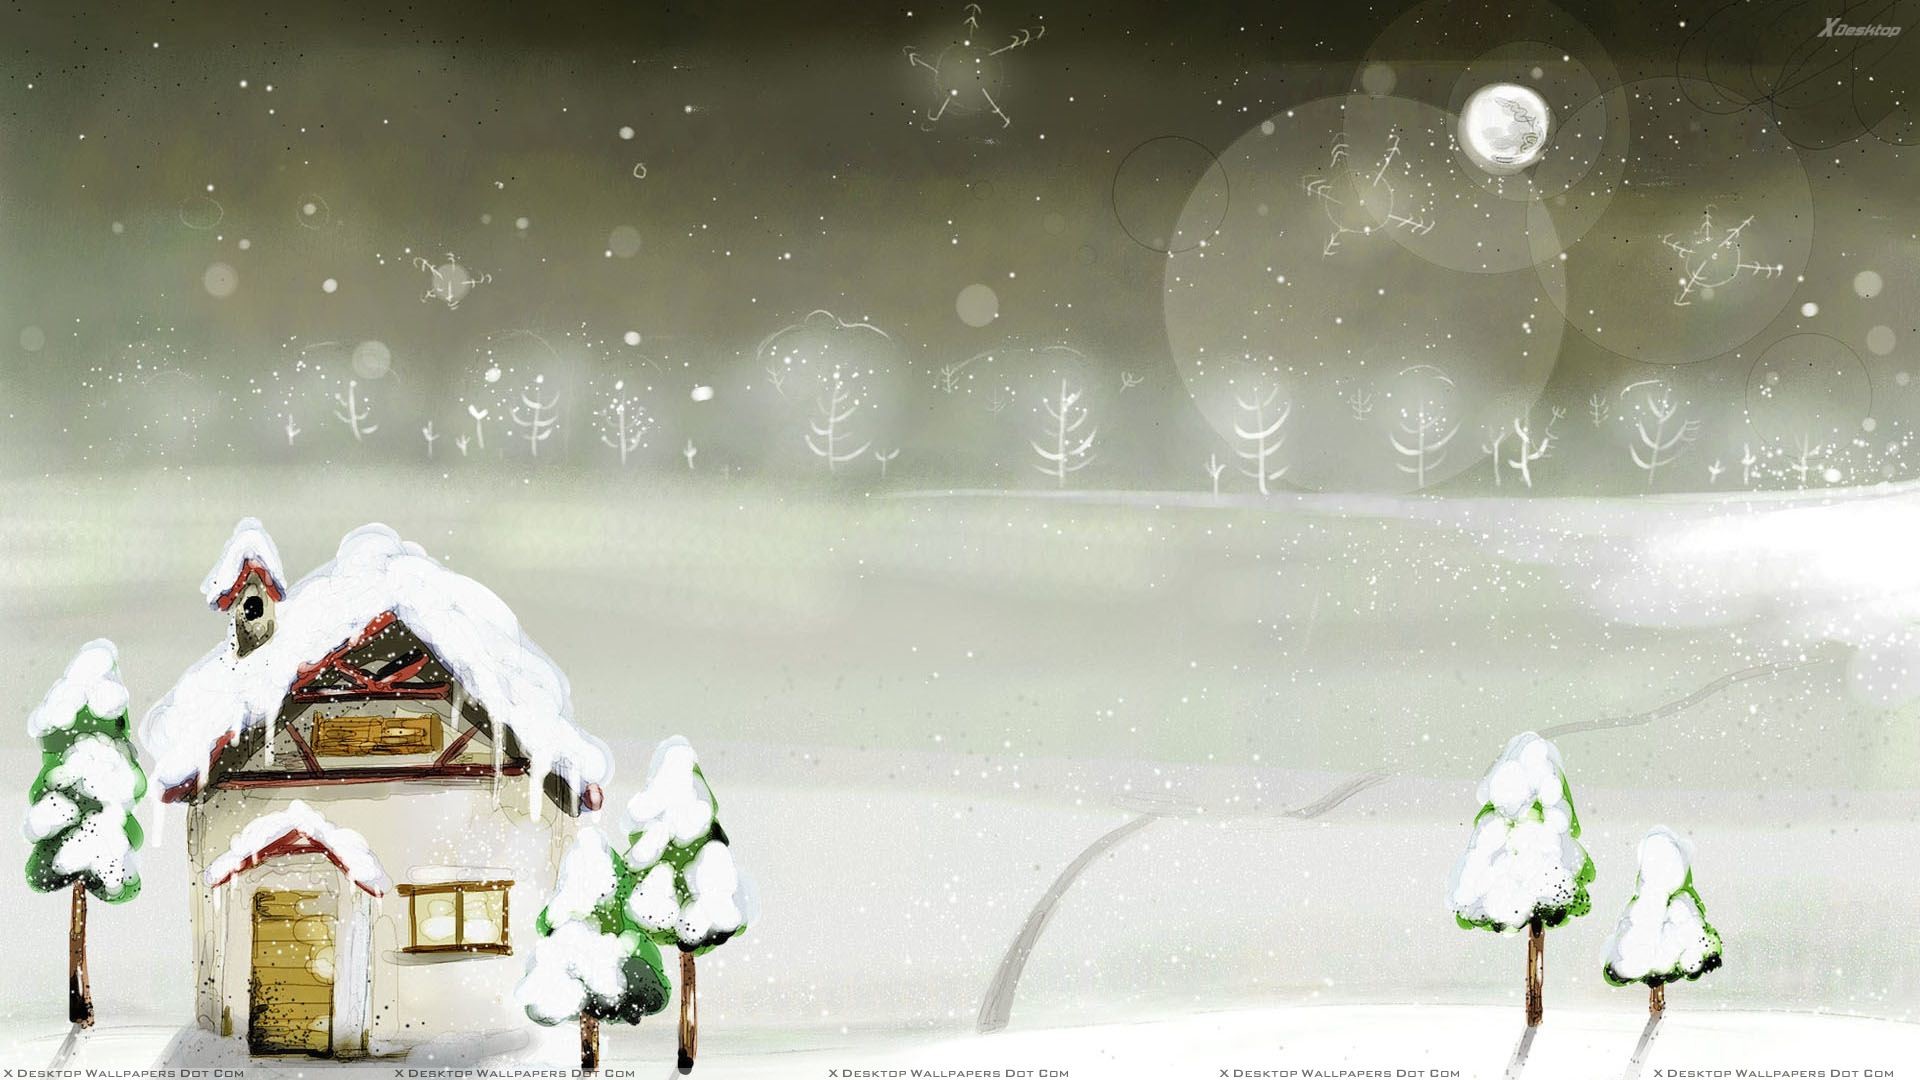 1920x1080 You are viewing wallpaper titled "Snowfall ...